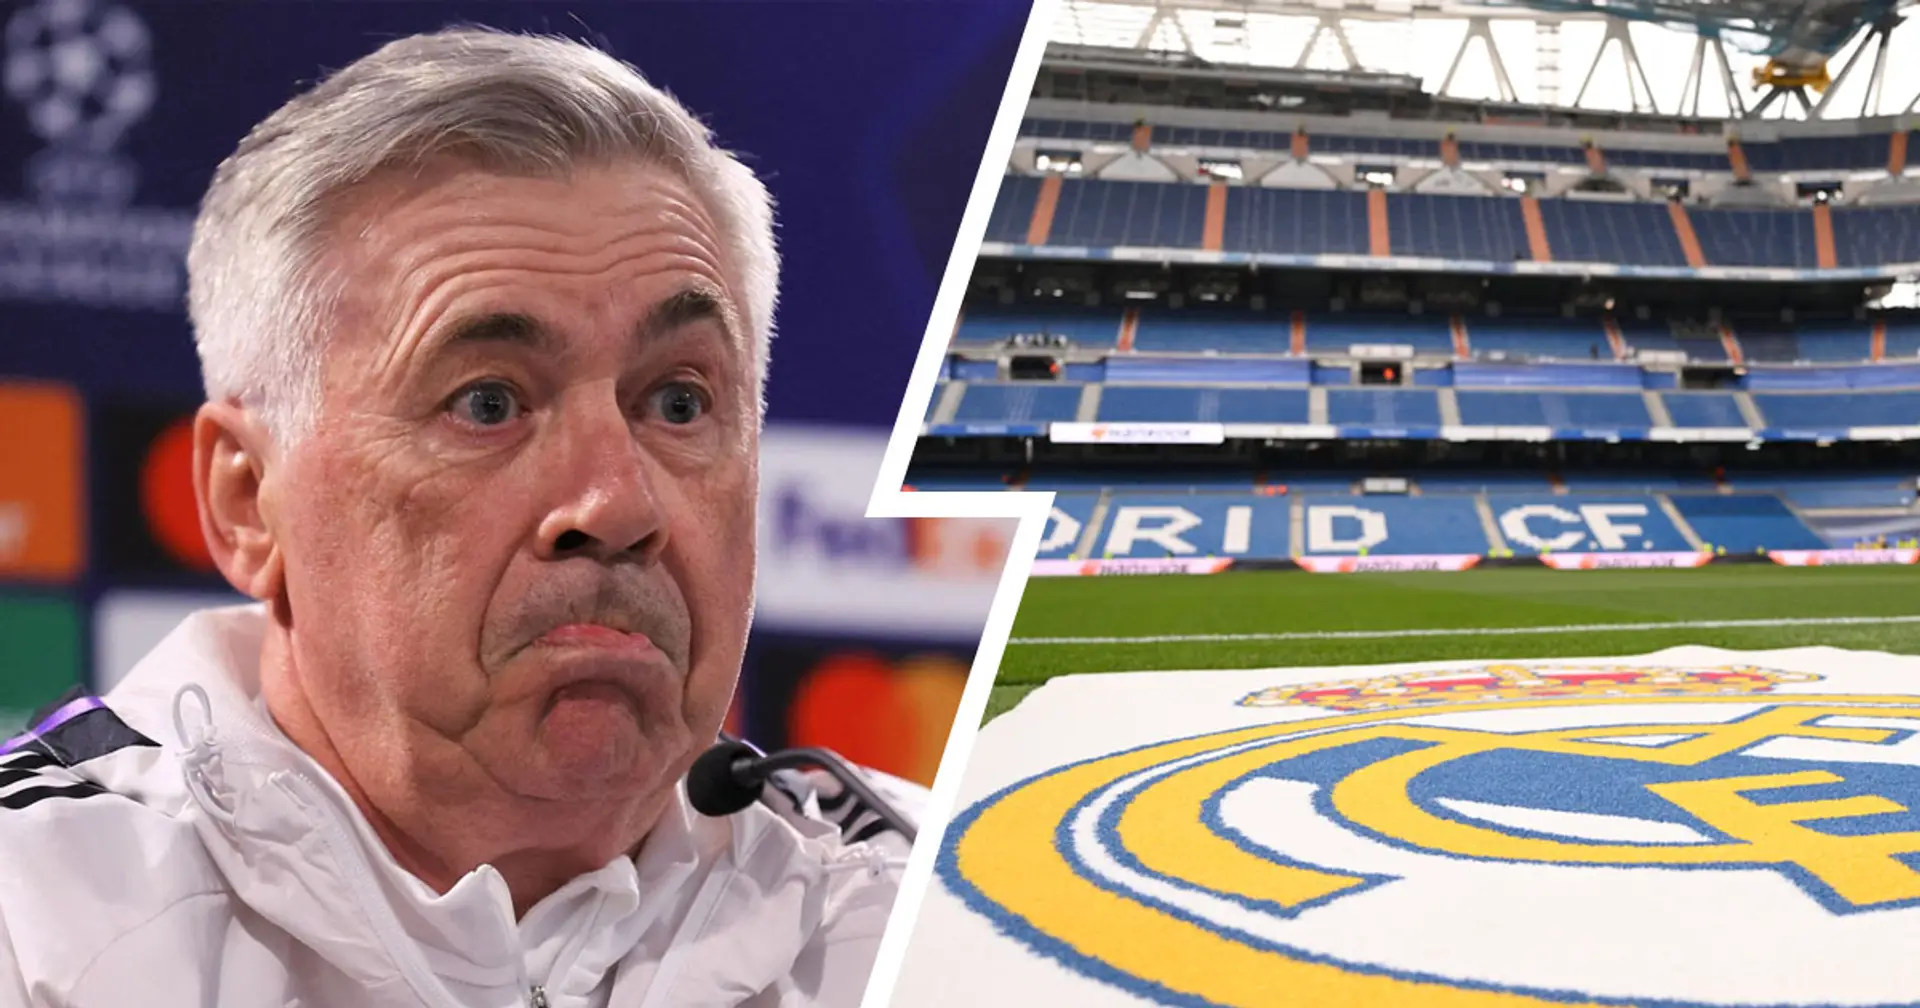 'They'll change it': Ancelotti reveals 'problem' Real Madrid are facing before Man City clash